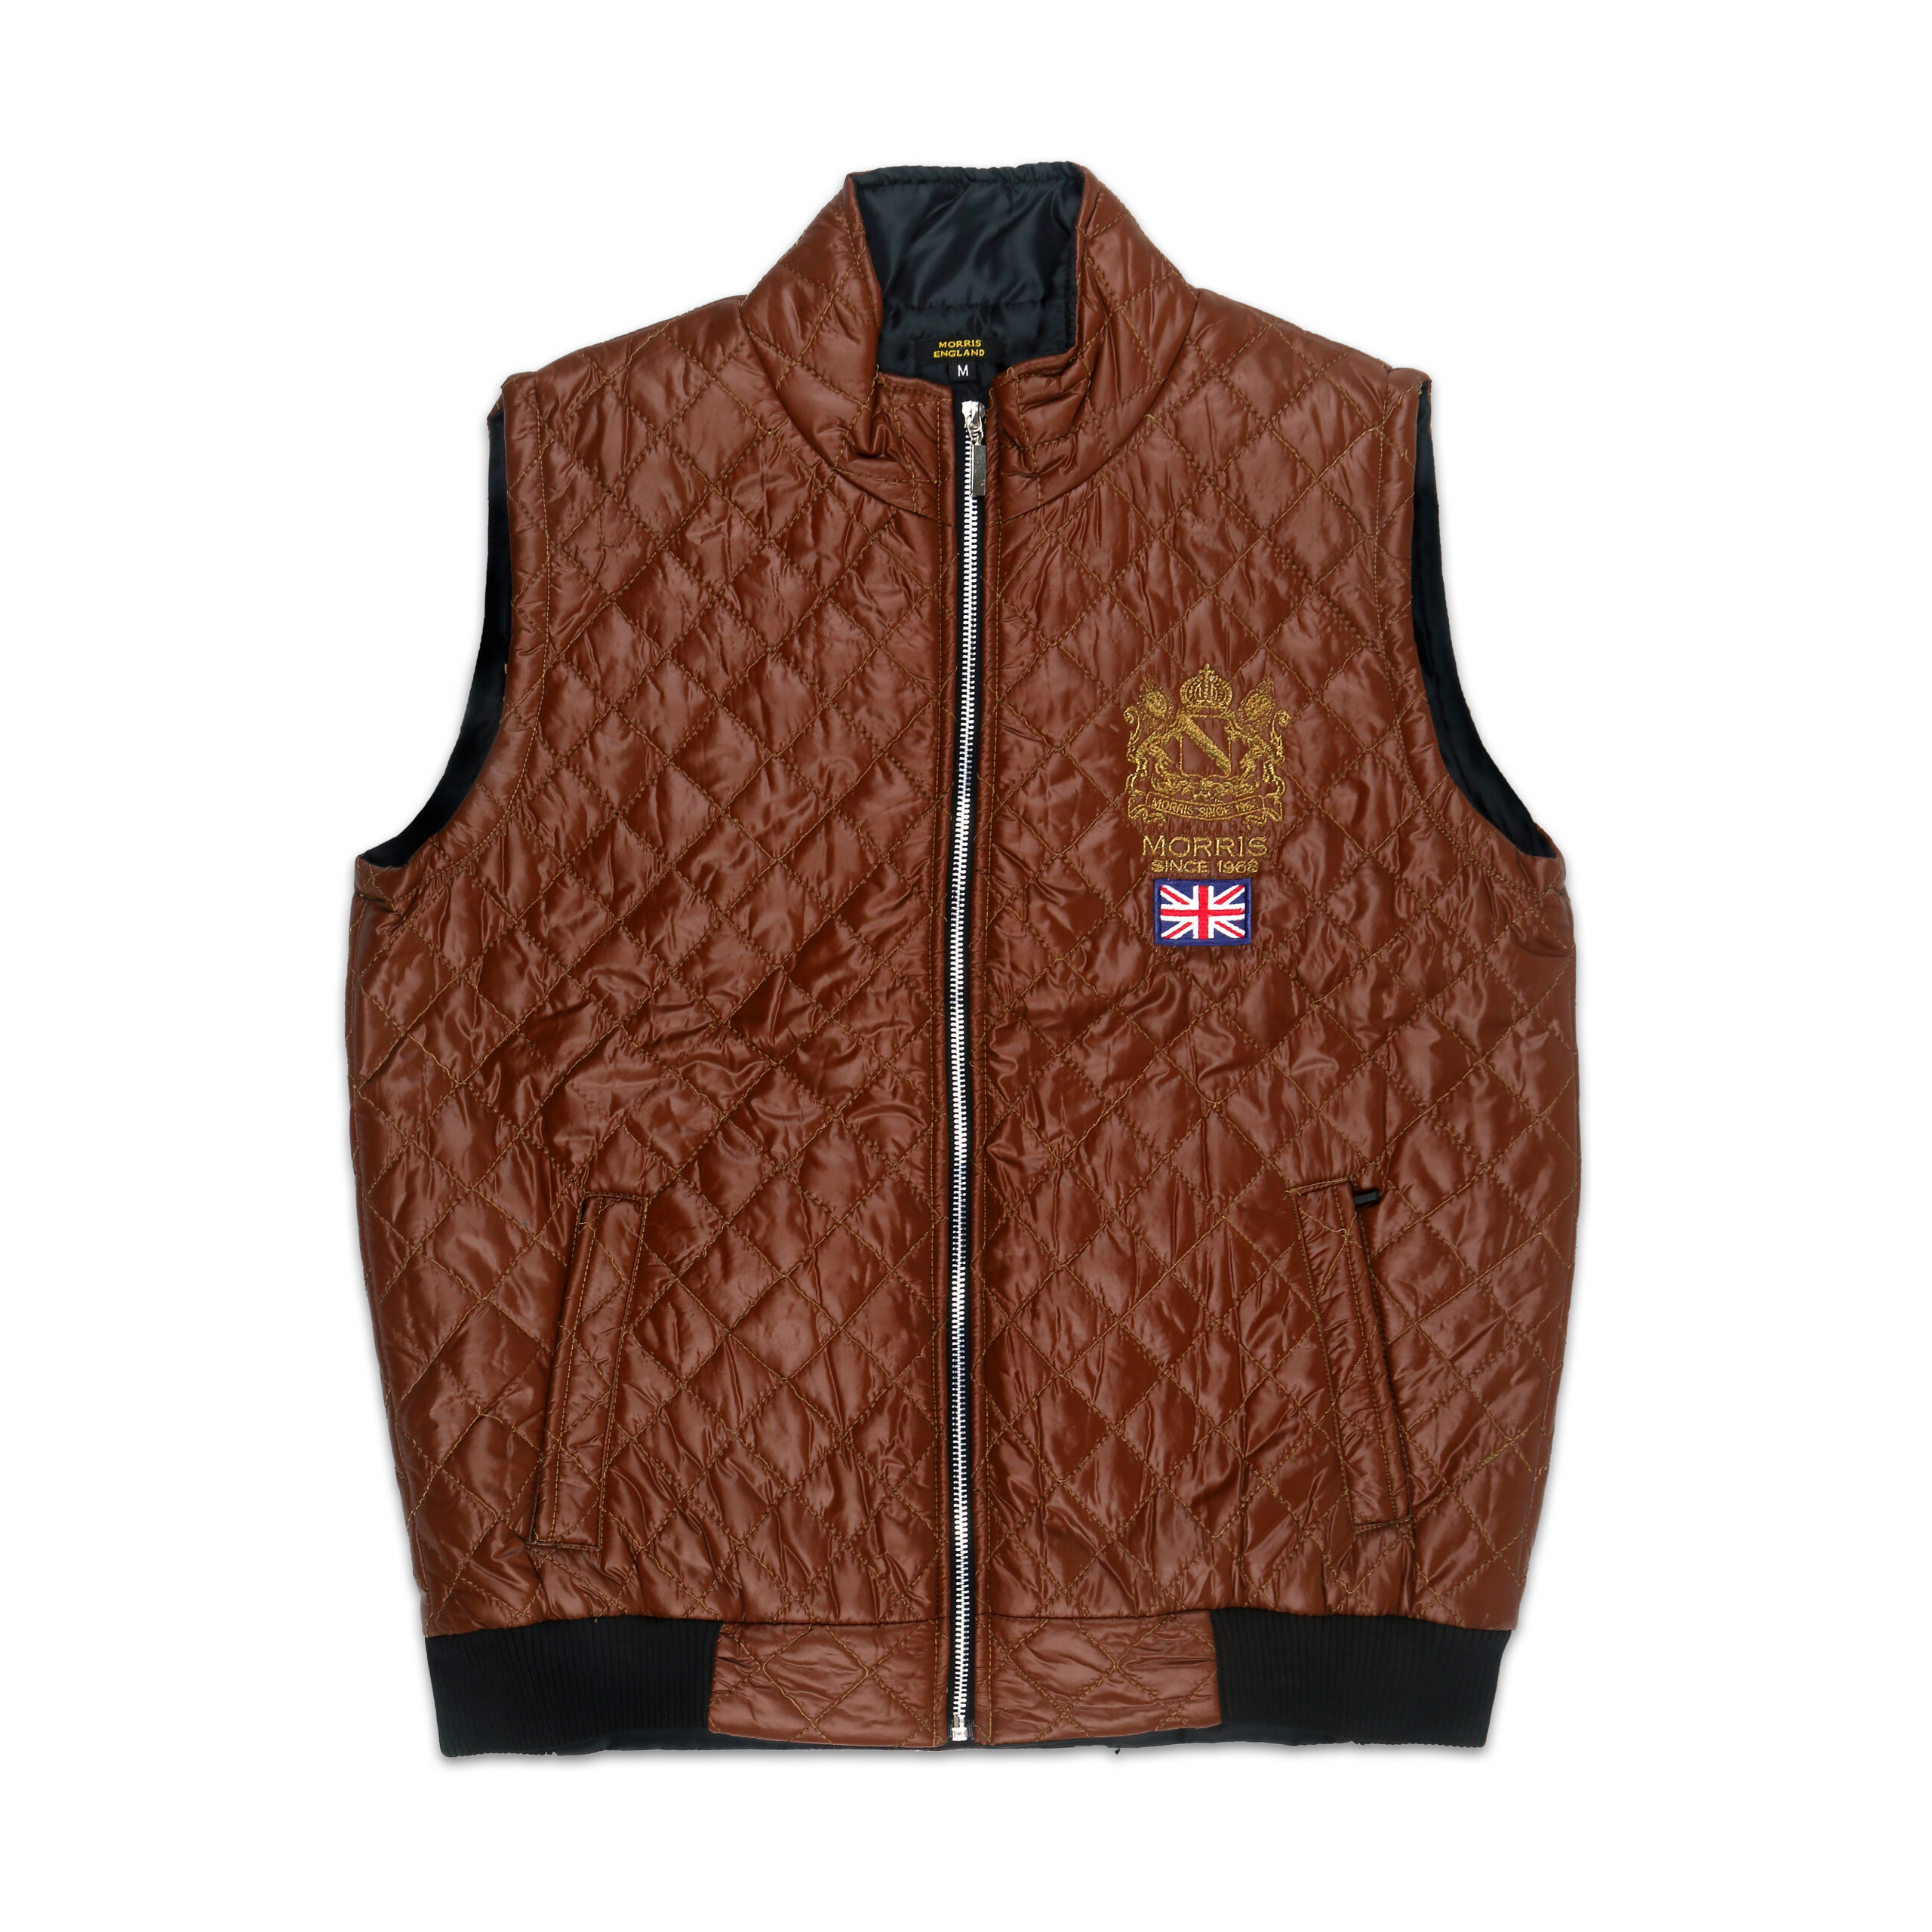 MORRIS | HALF SELEEVES PUFFER JACKET | 100% IMPORTED QUALITY | EMBRAIDED BADGE | BROWN